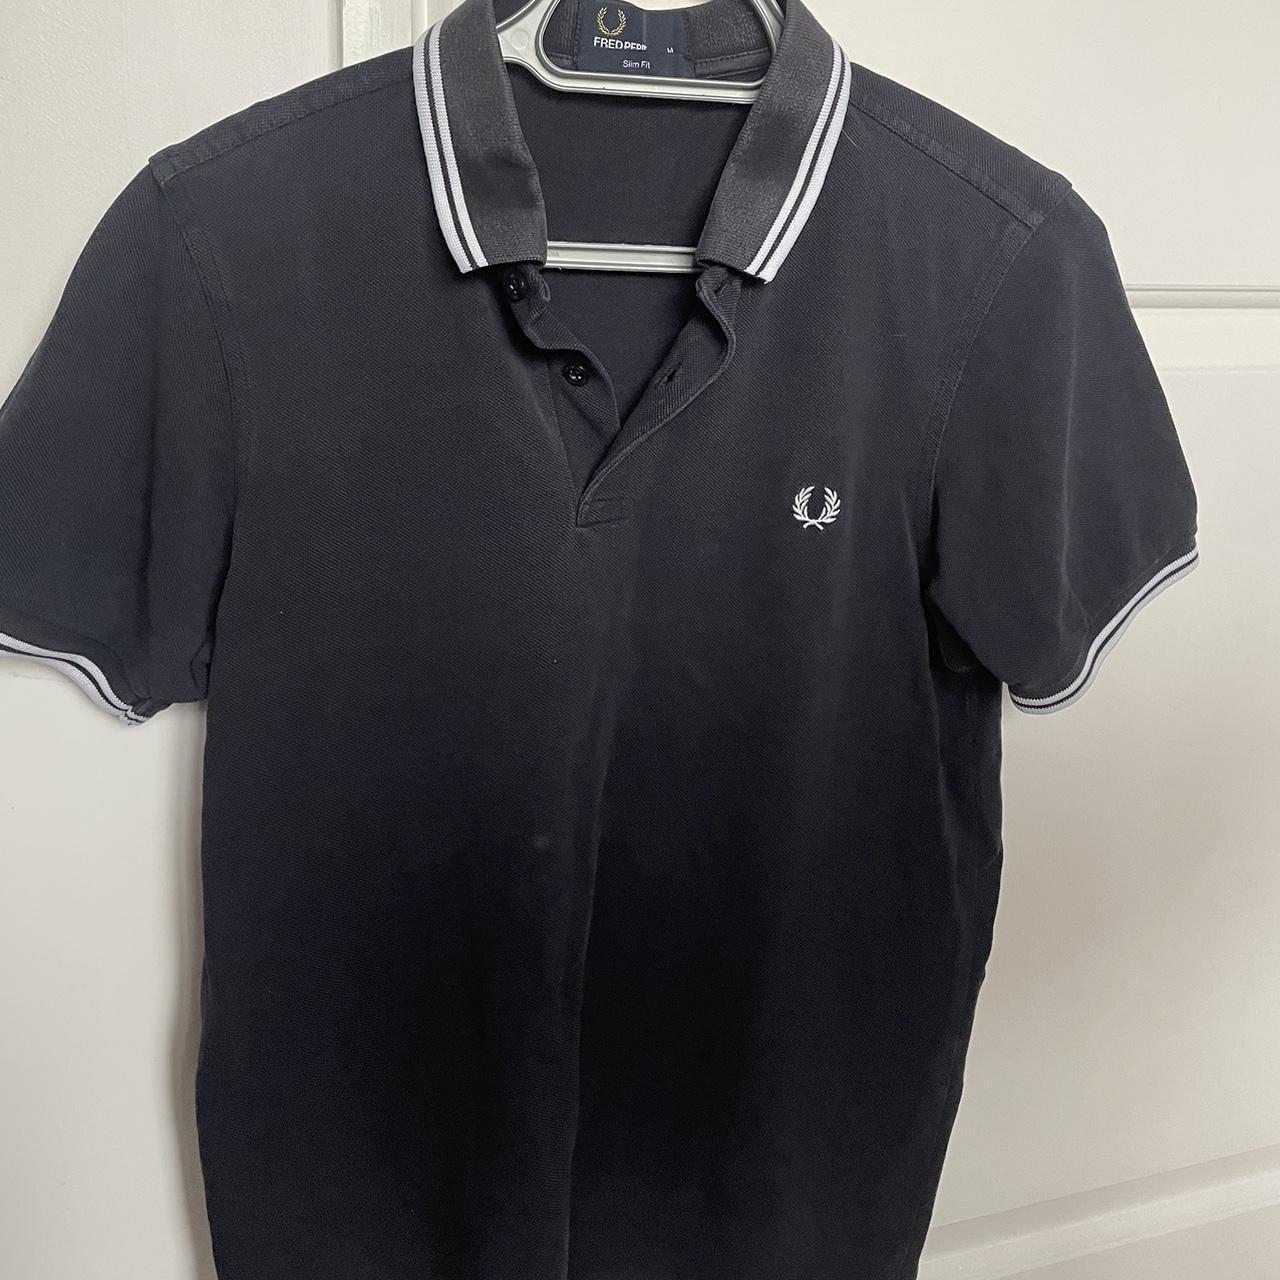 Black Fred Perry polo | Size Medium - could fit a... - Depop